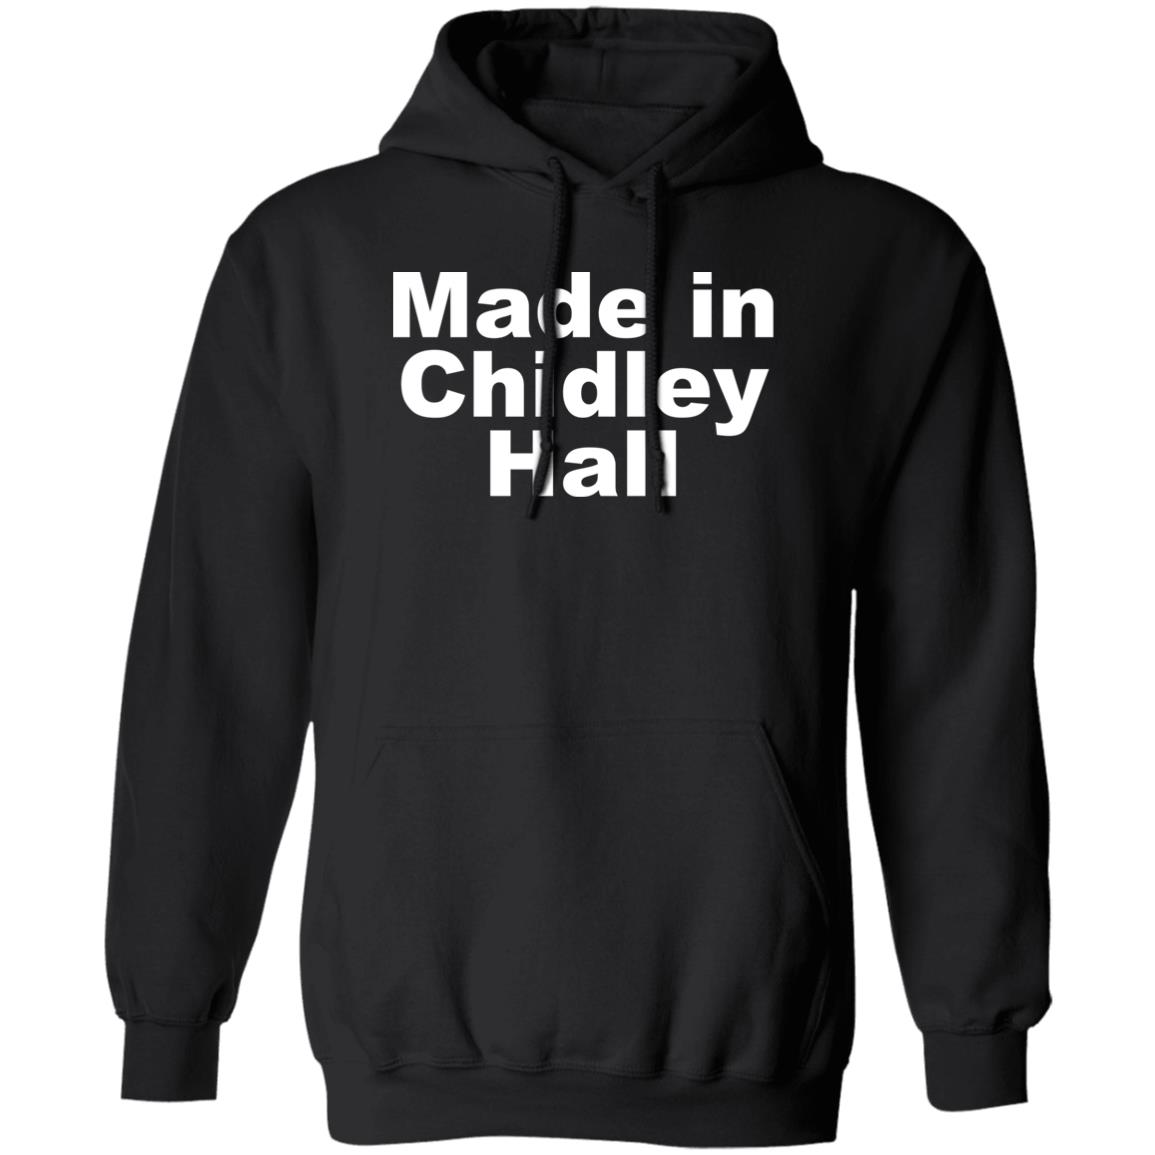 Made In Chidley Hall Shirt 1